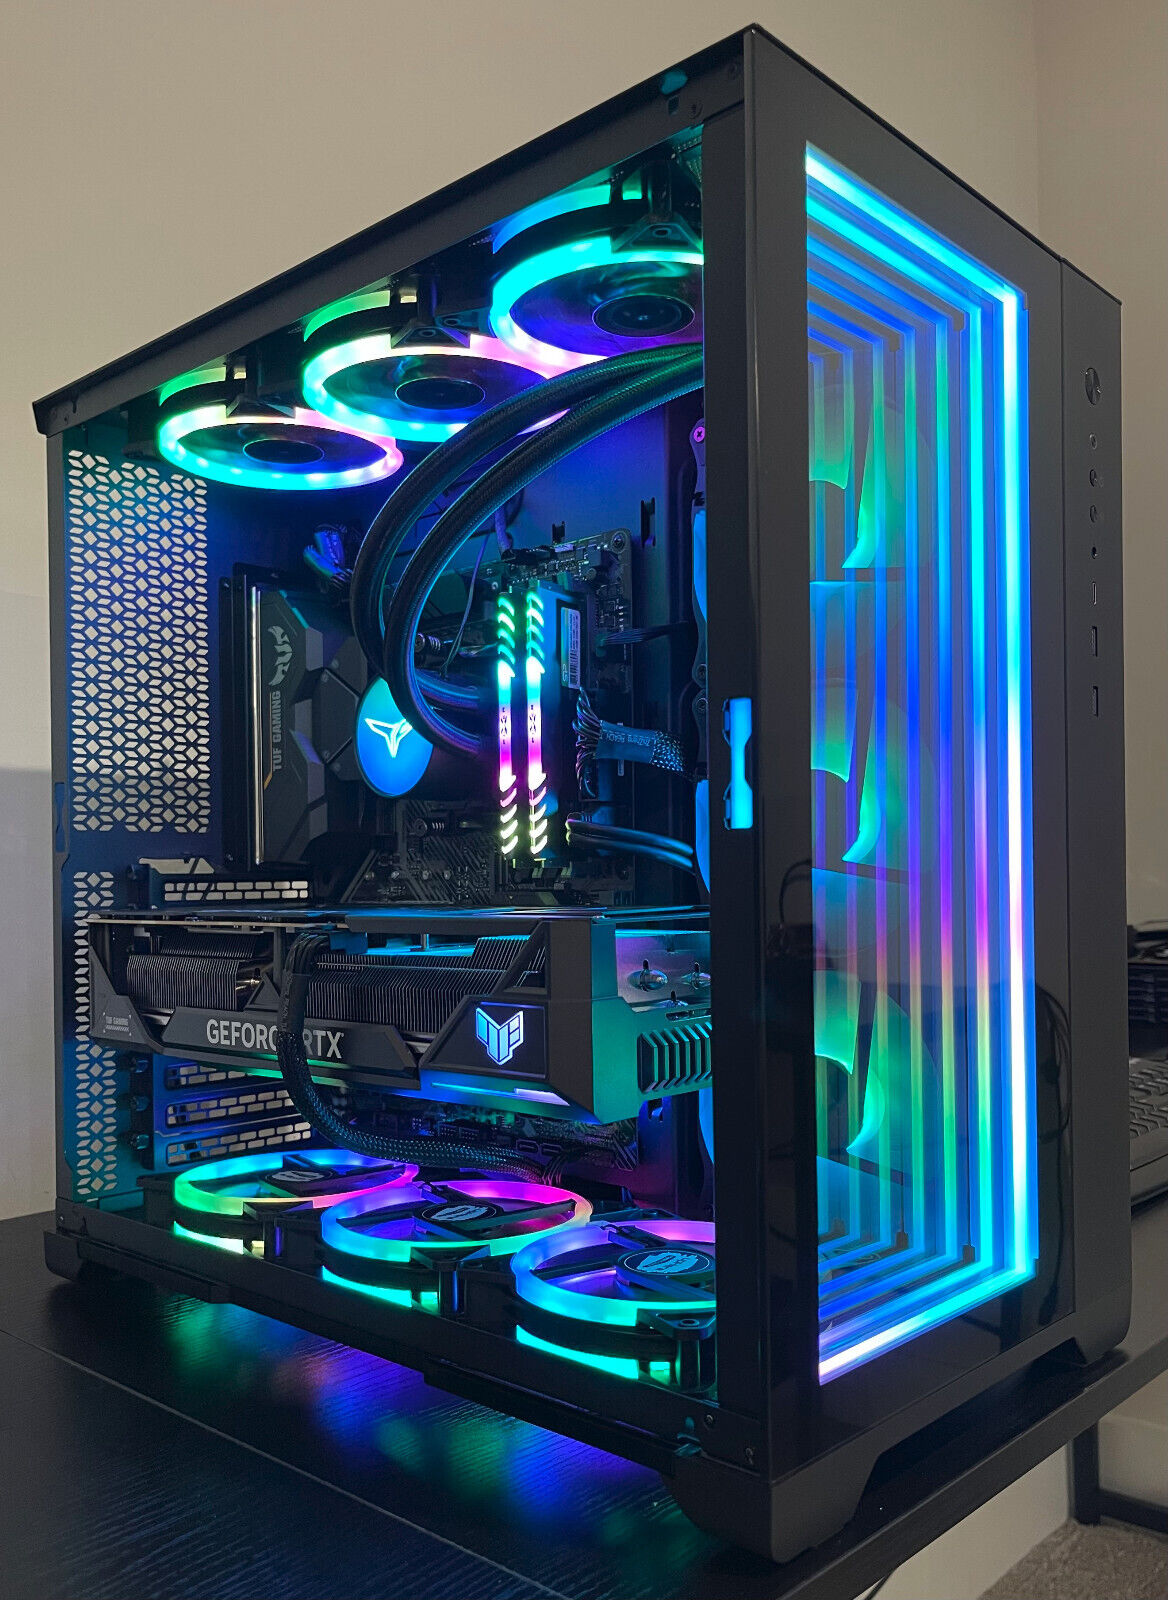 Loving the RGB on this gaming beast!